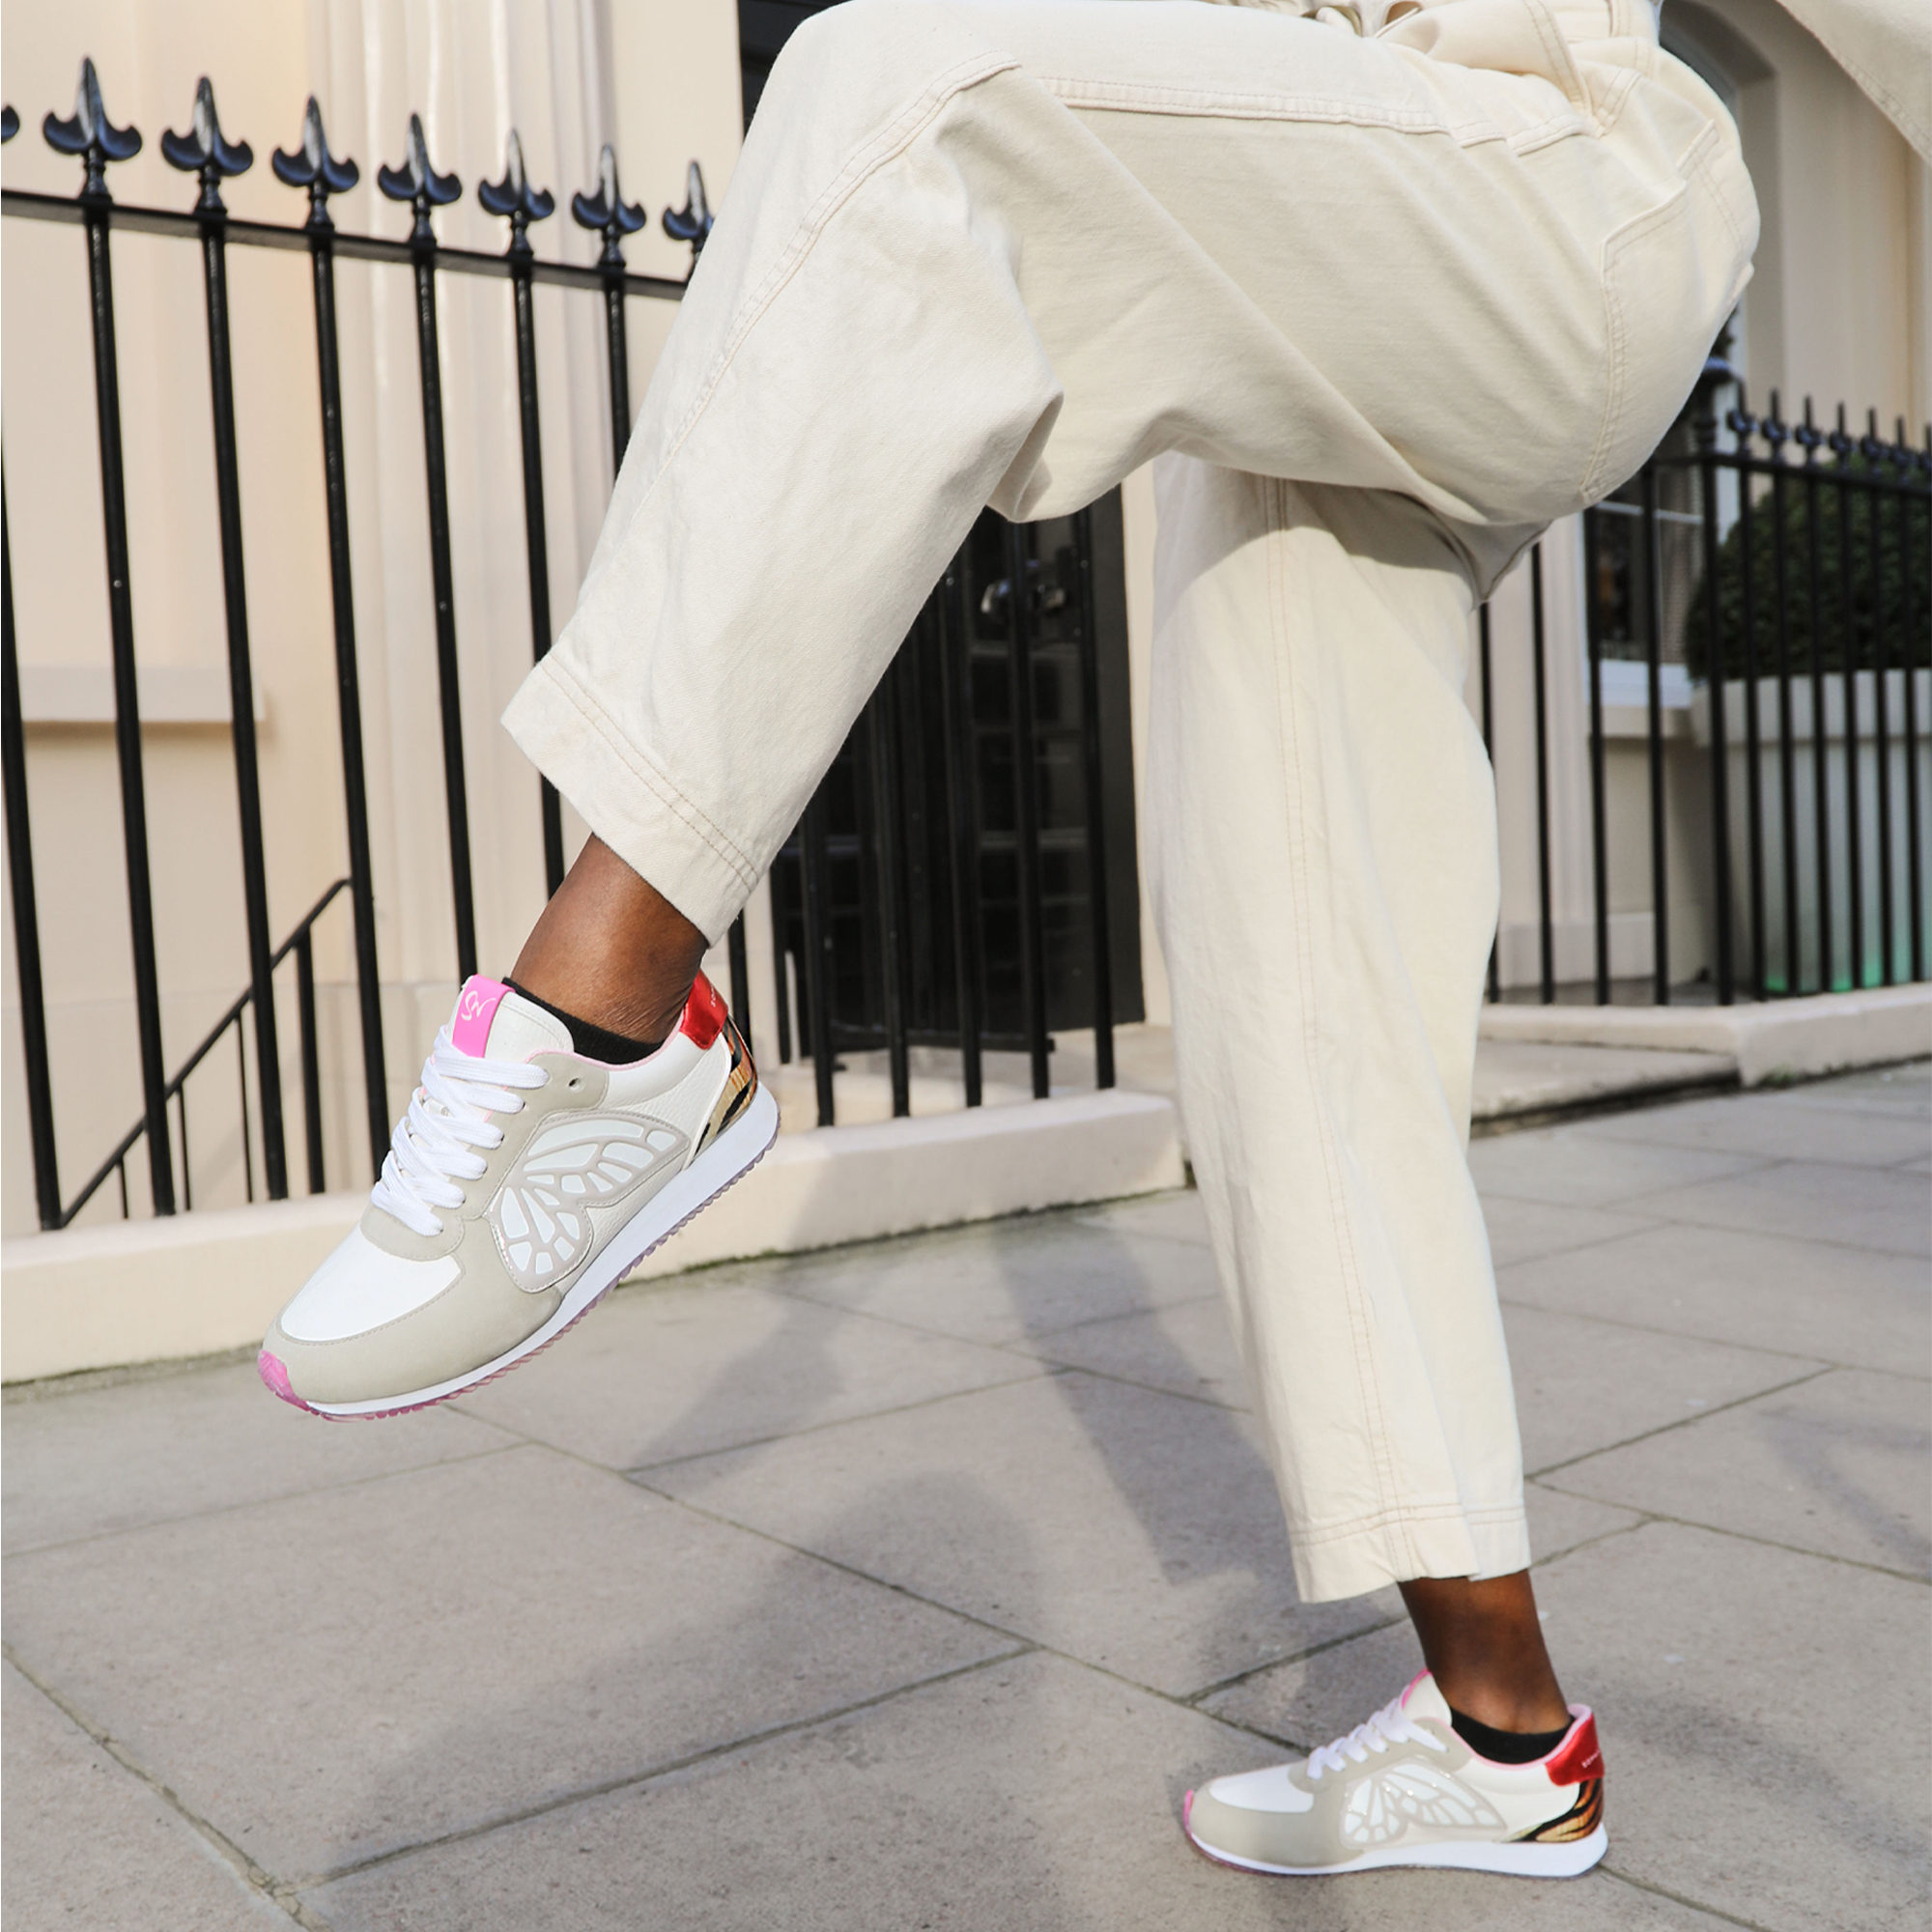 Discover more than 205 sophia webster sneakers